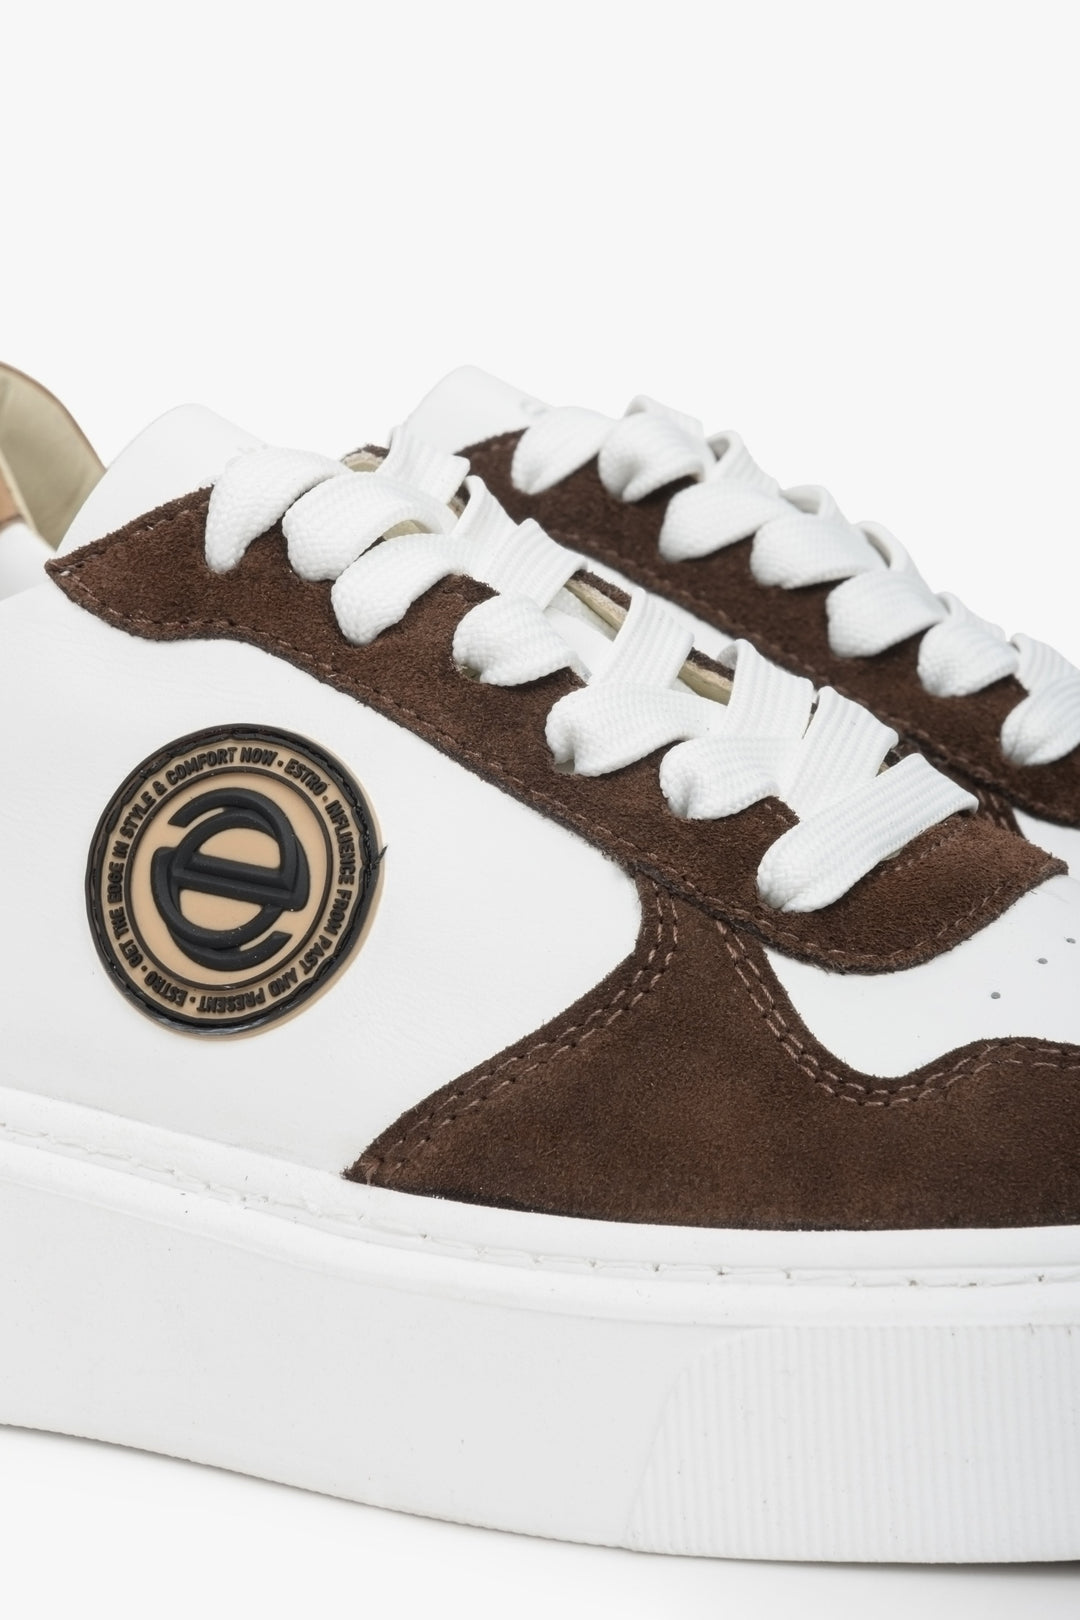 Estro velour and leather sneakers in white and brown. Close-up of decorative logo.